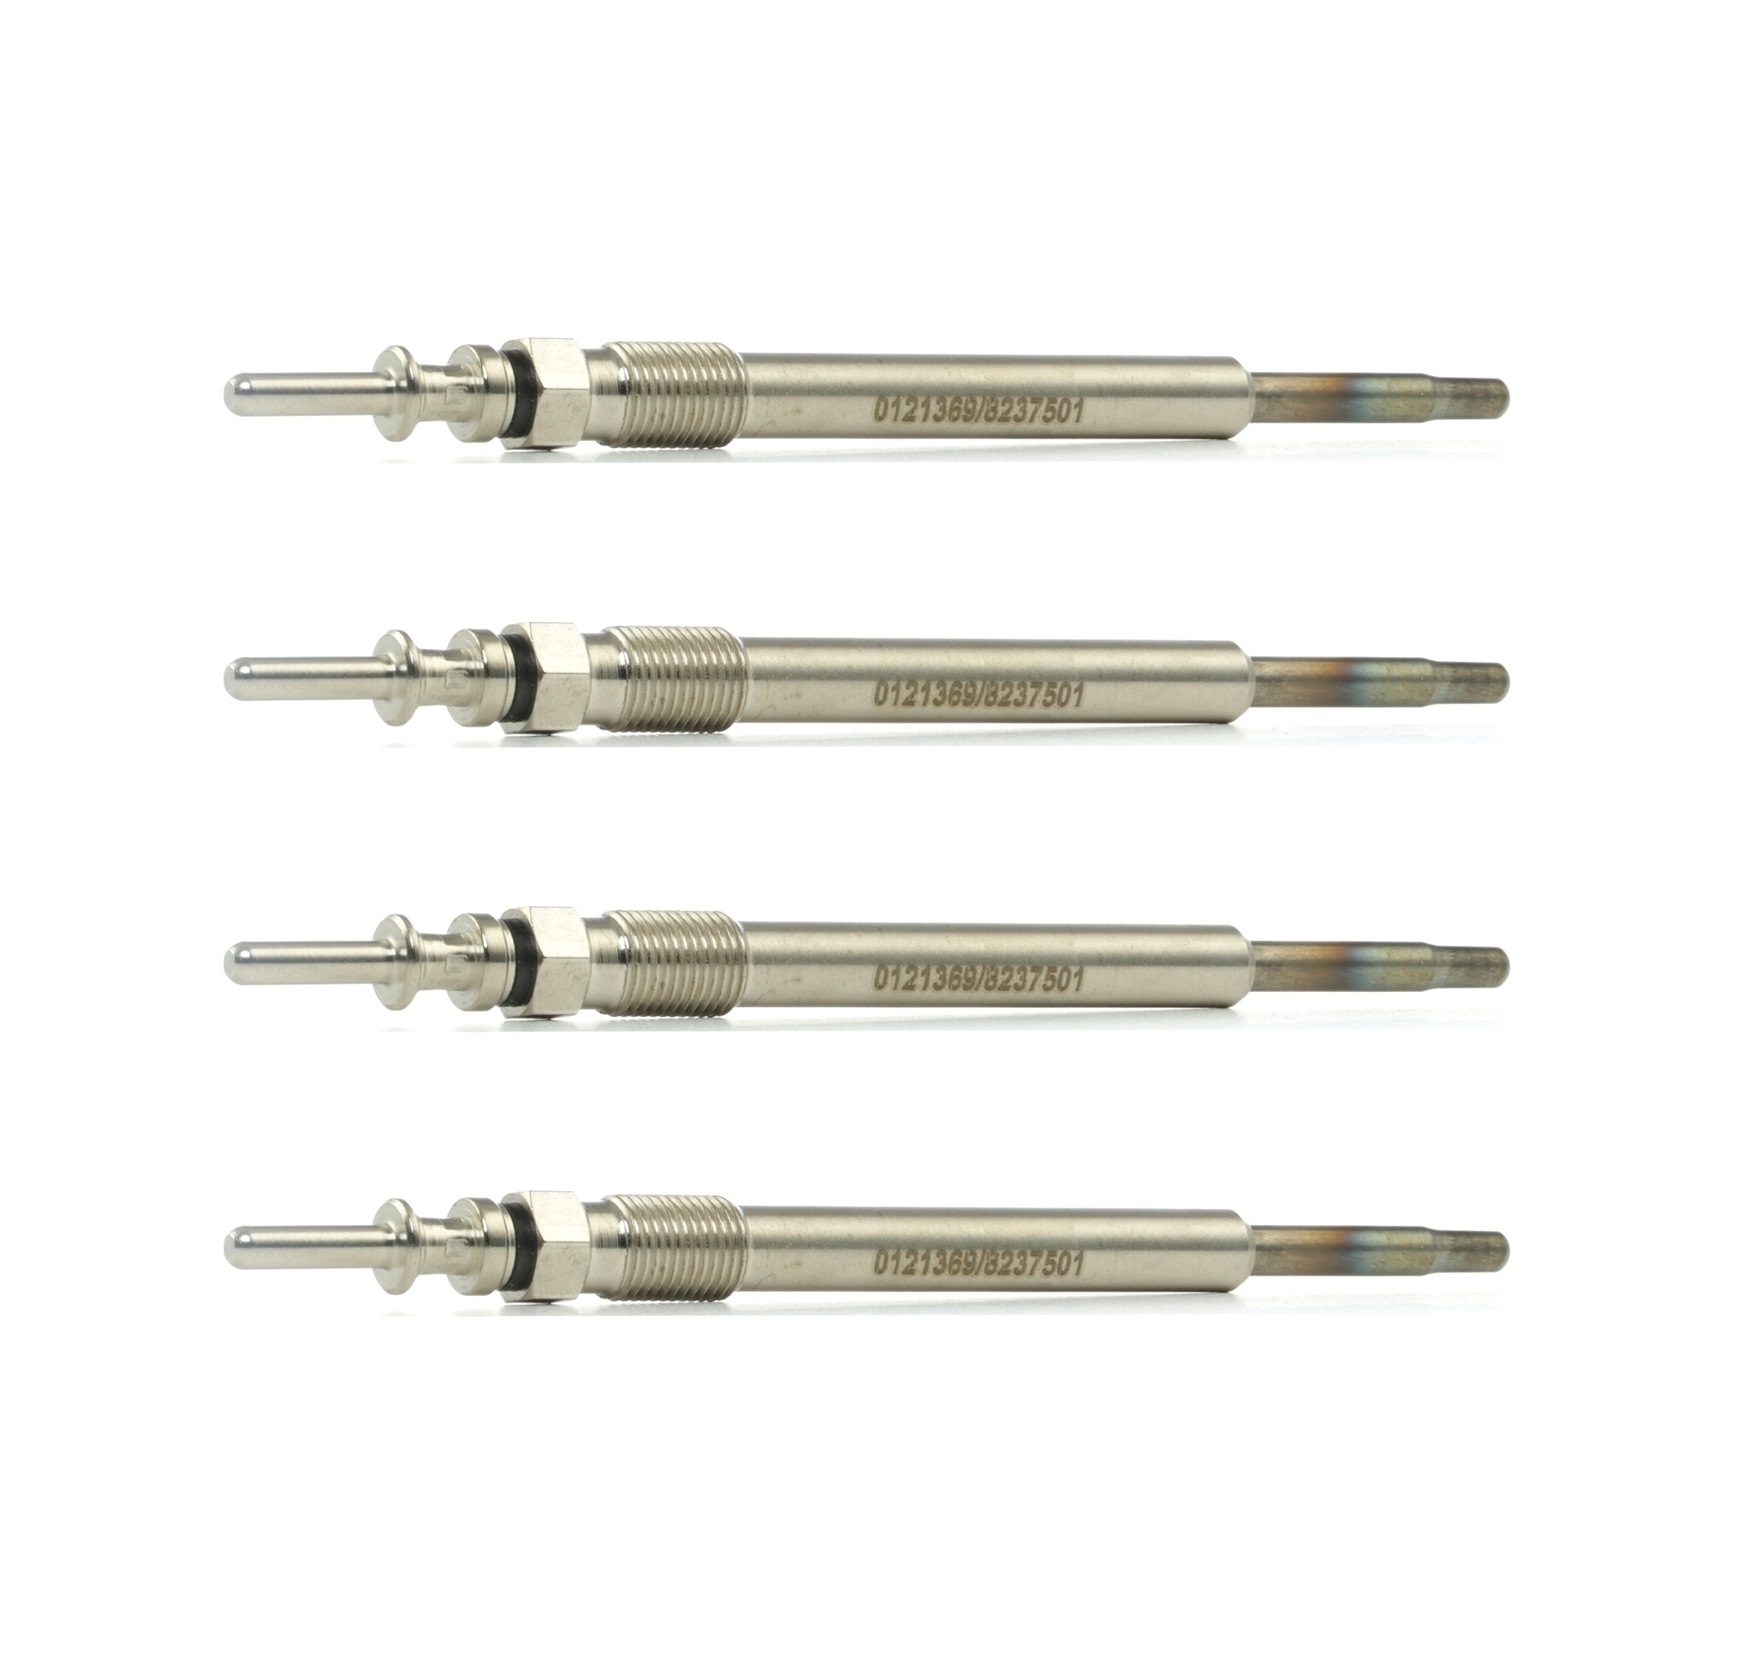 STARK 11V 15,5A M10x1,0, after-glow capable, Pencil-type Glow Plug, 135 mm, 63 Total Length: 135mm, Thread Size: M10x1,0 Glow plugs SKGP-1890218 buy